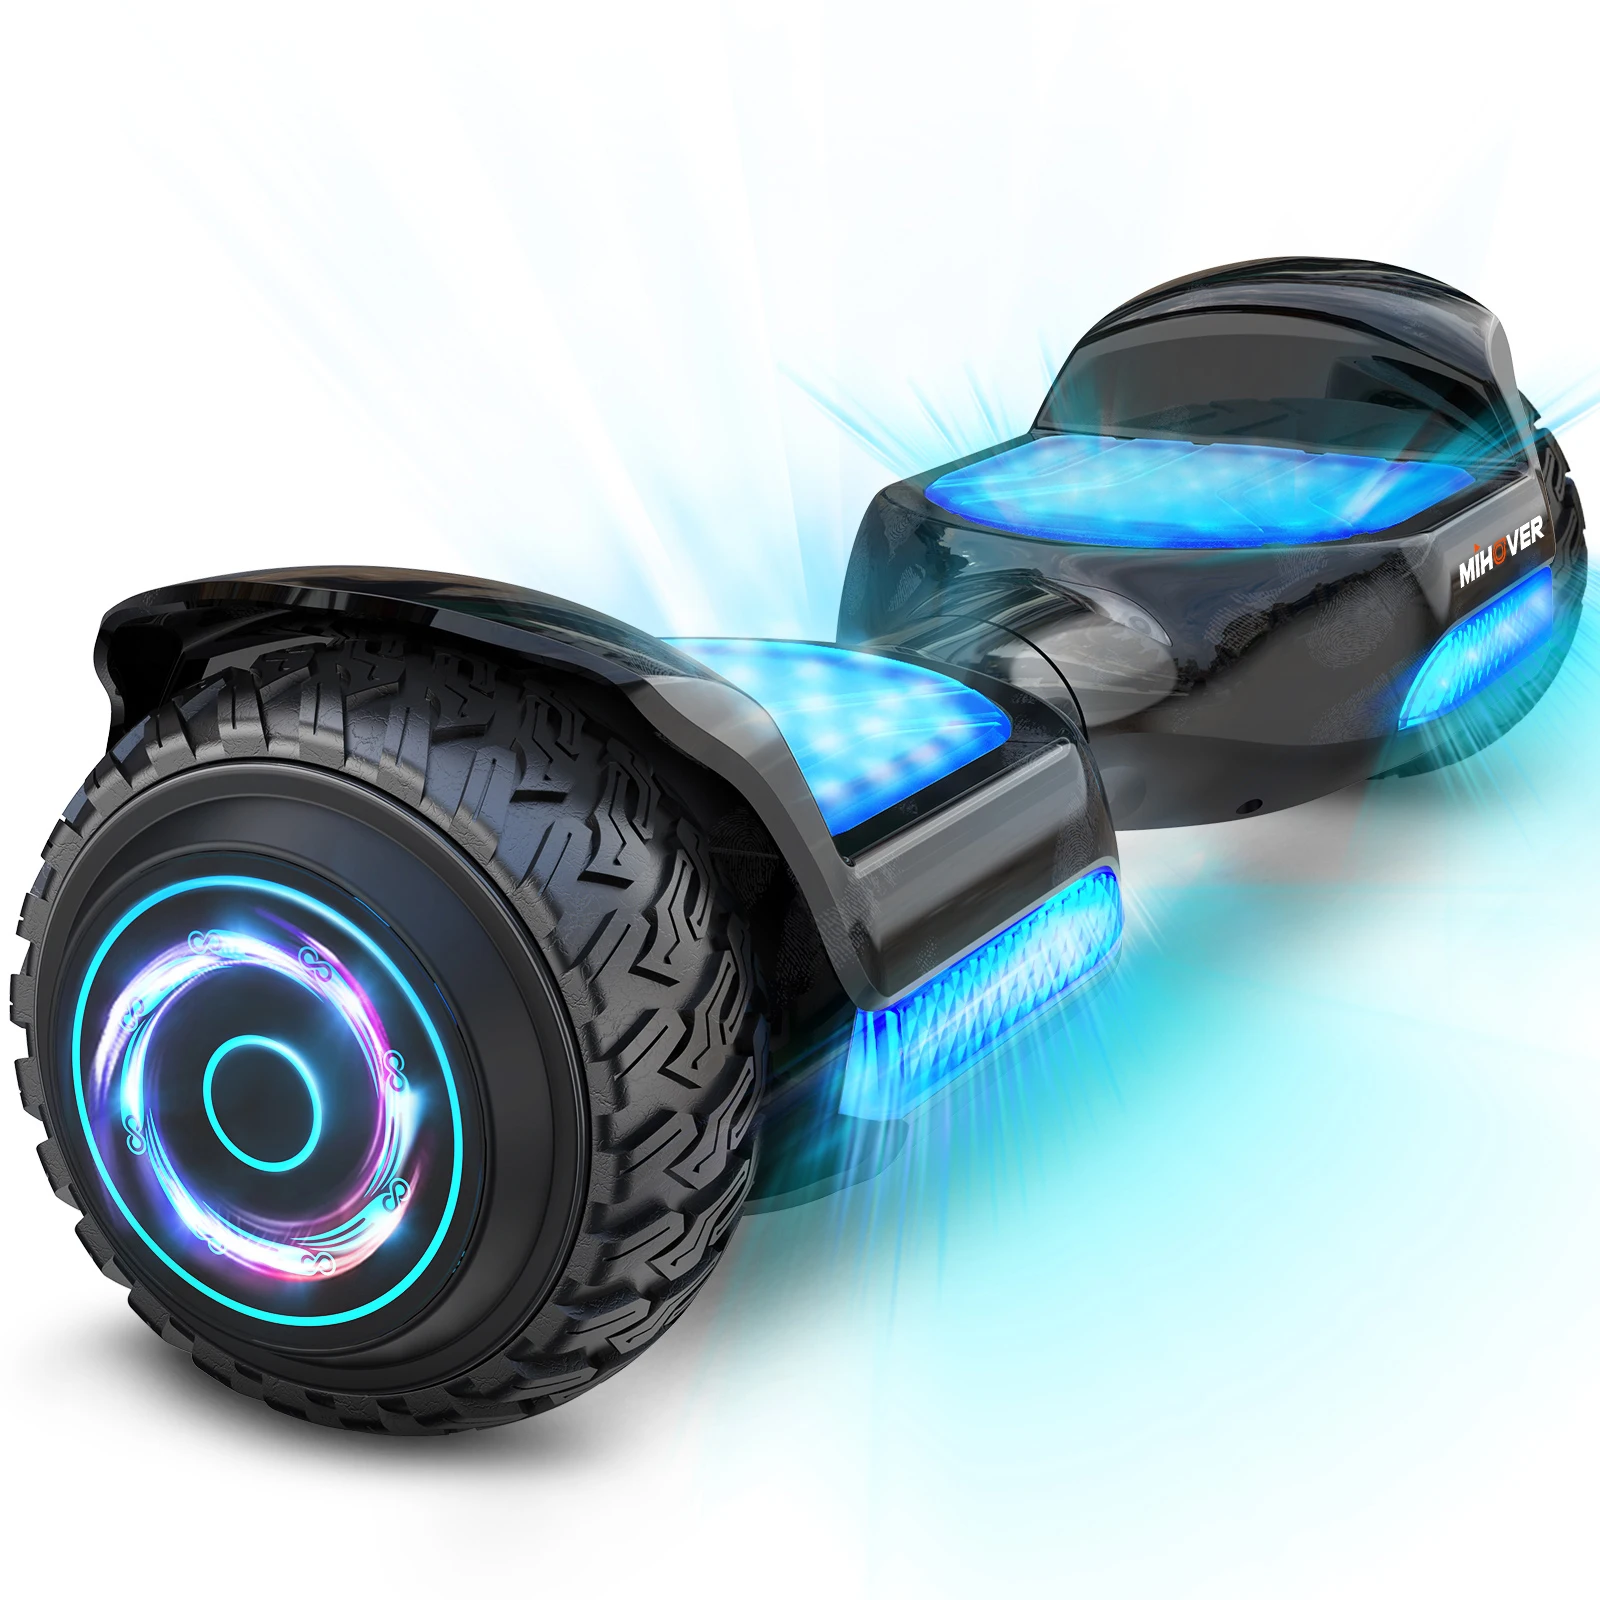 

MIHOVER Cheap Original 6.5'' 15 Polegadas Uwheel LED Light Electric Scooter Hoverboard With Self Balance, Black, silver, red, blue